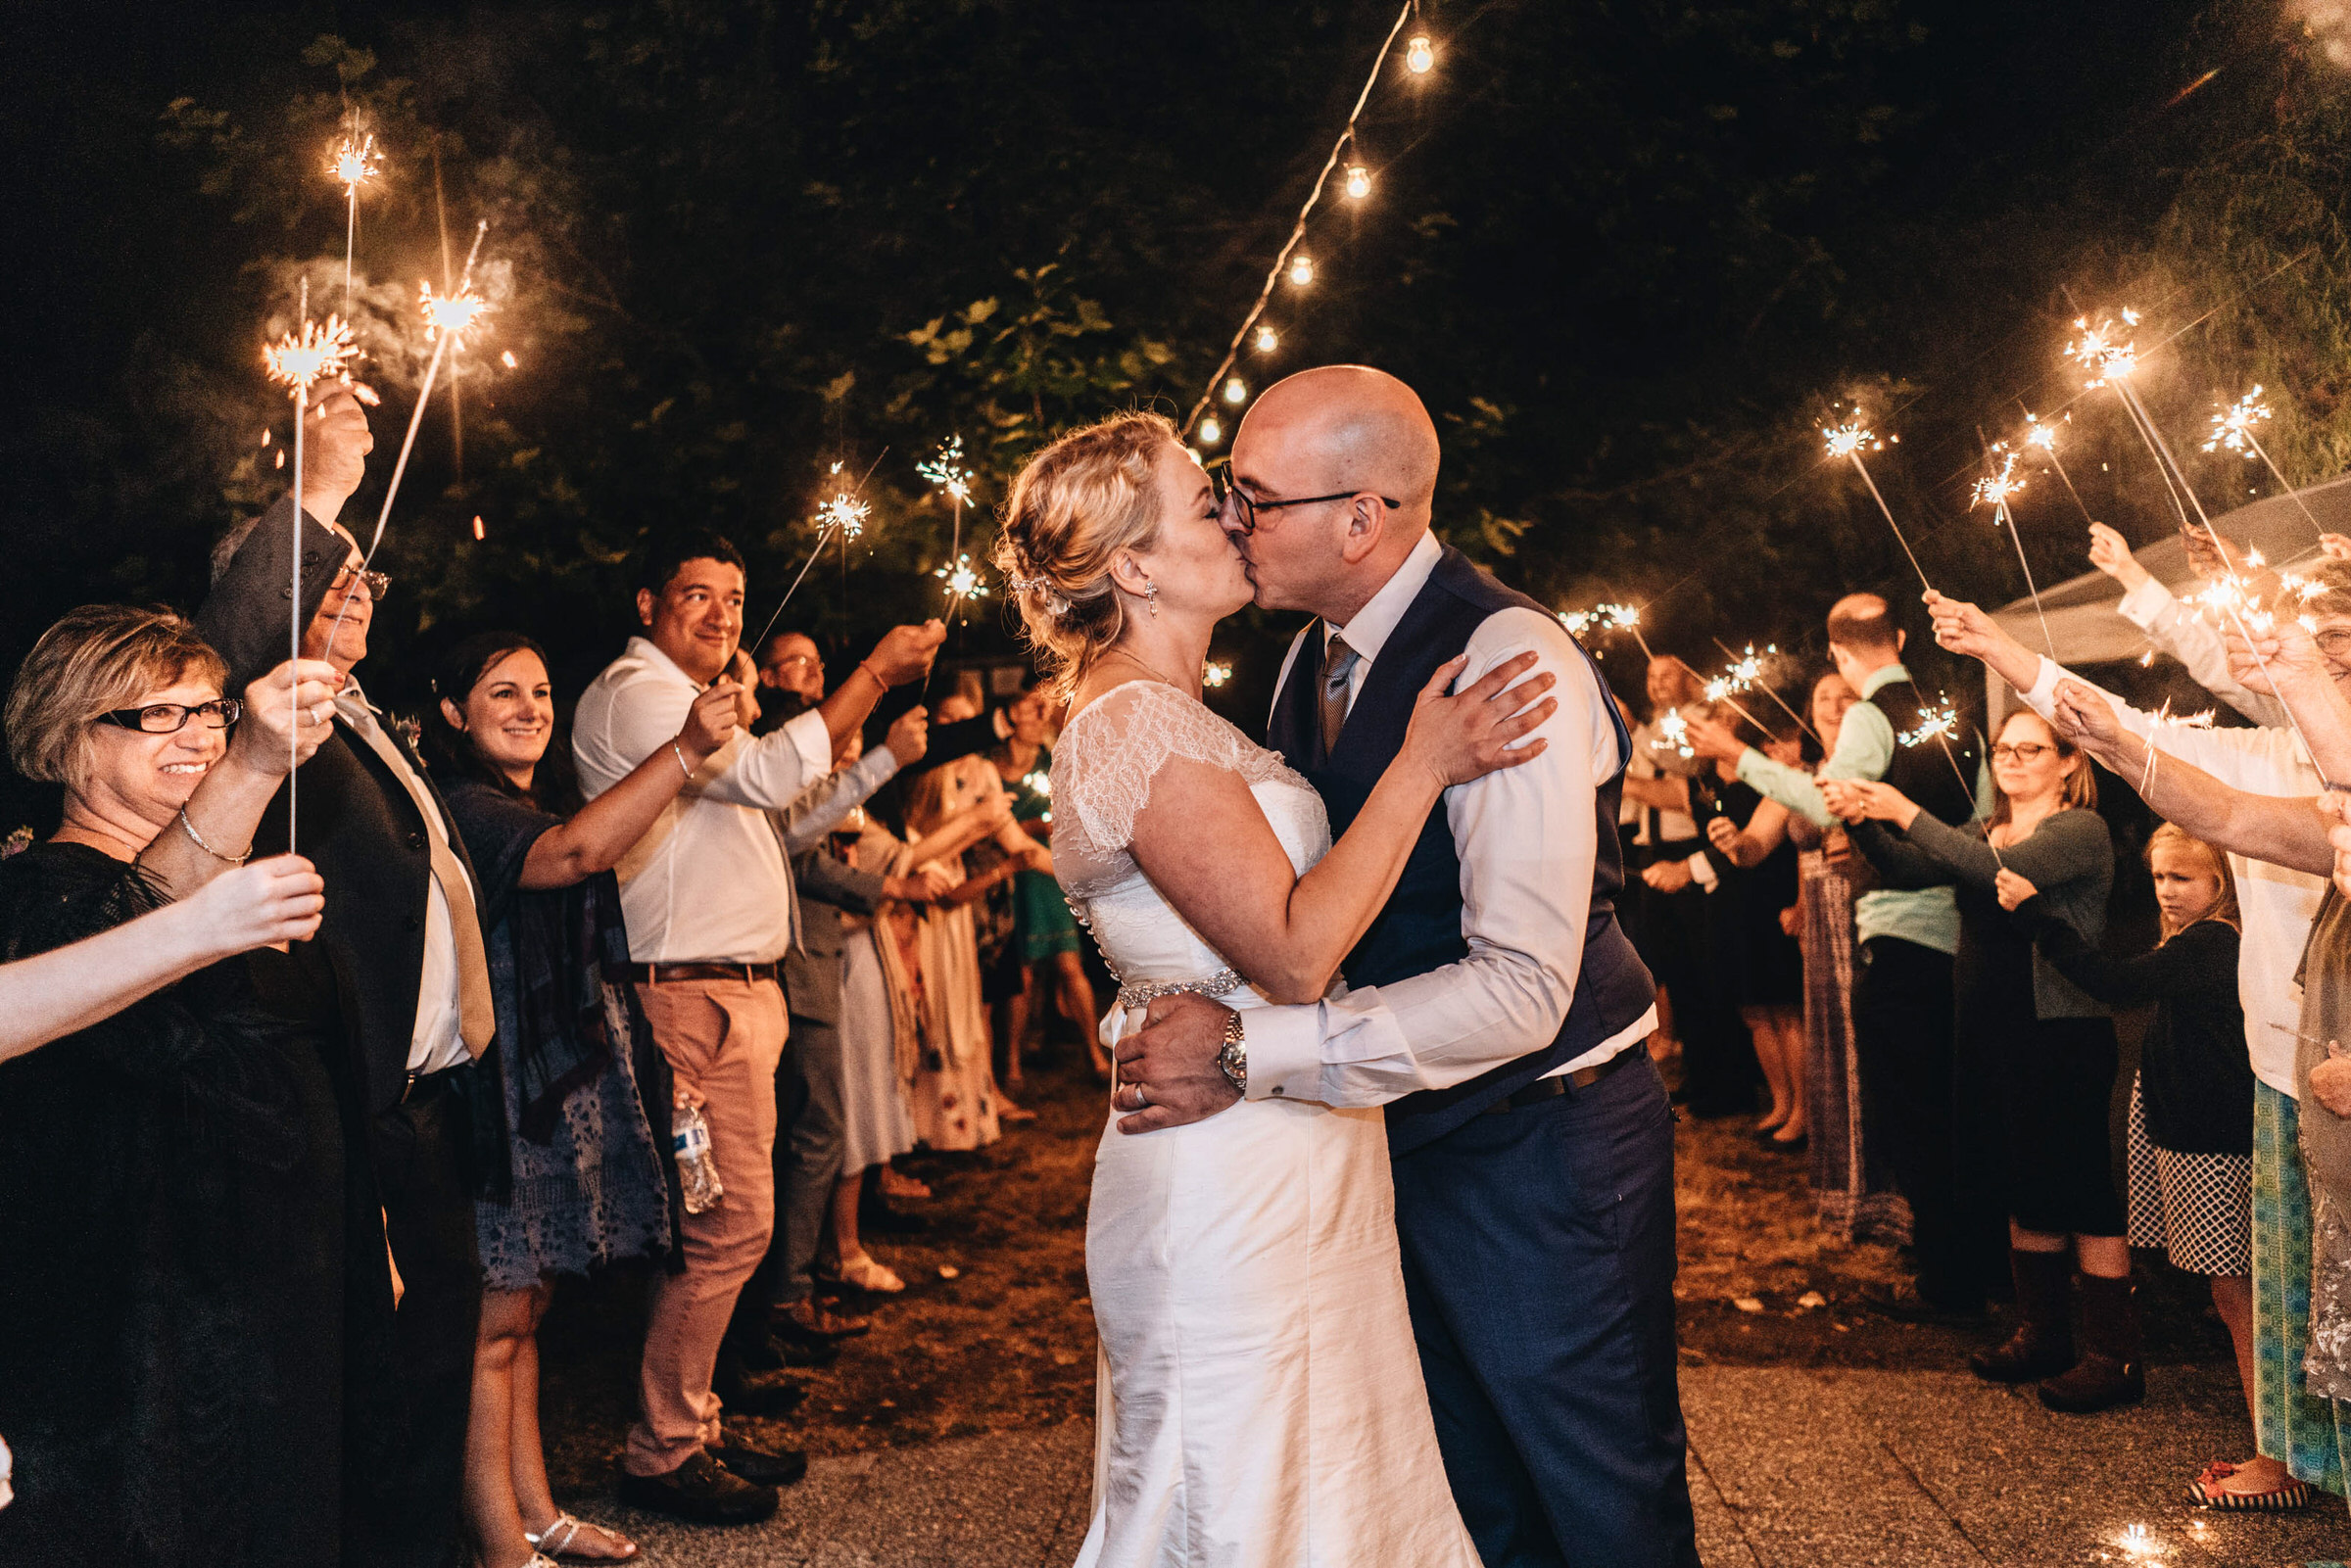 Wayfarer Whidbey Island Wedding: Sara and Joe share a kiss at the end of their night with friends and sparklers!